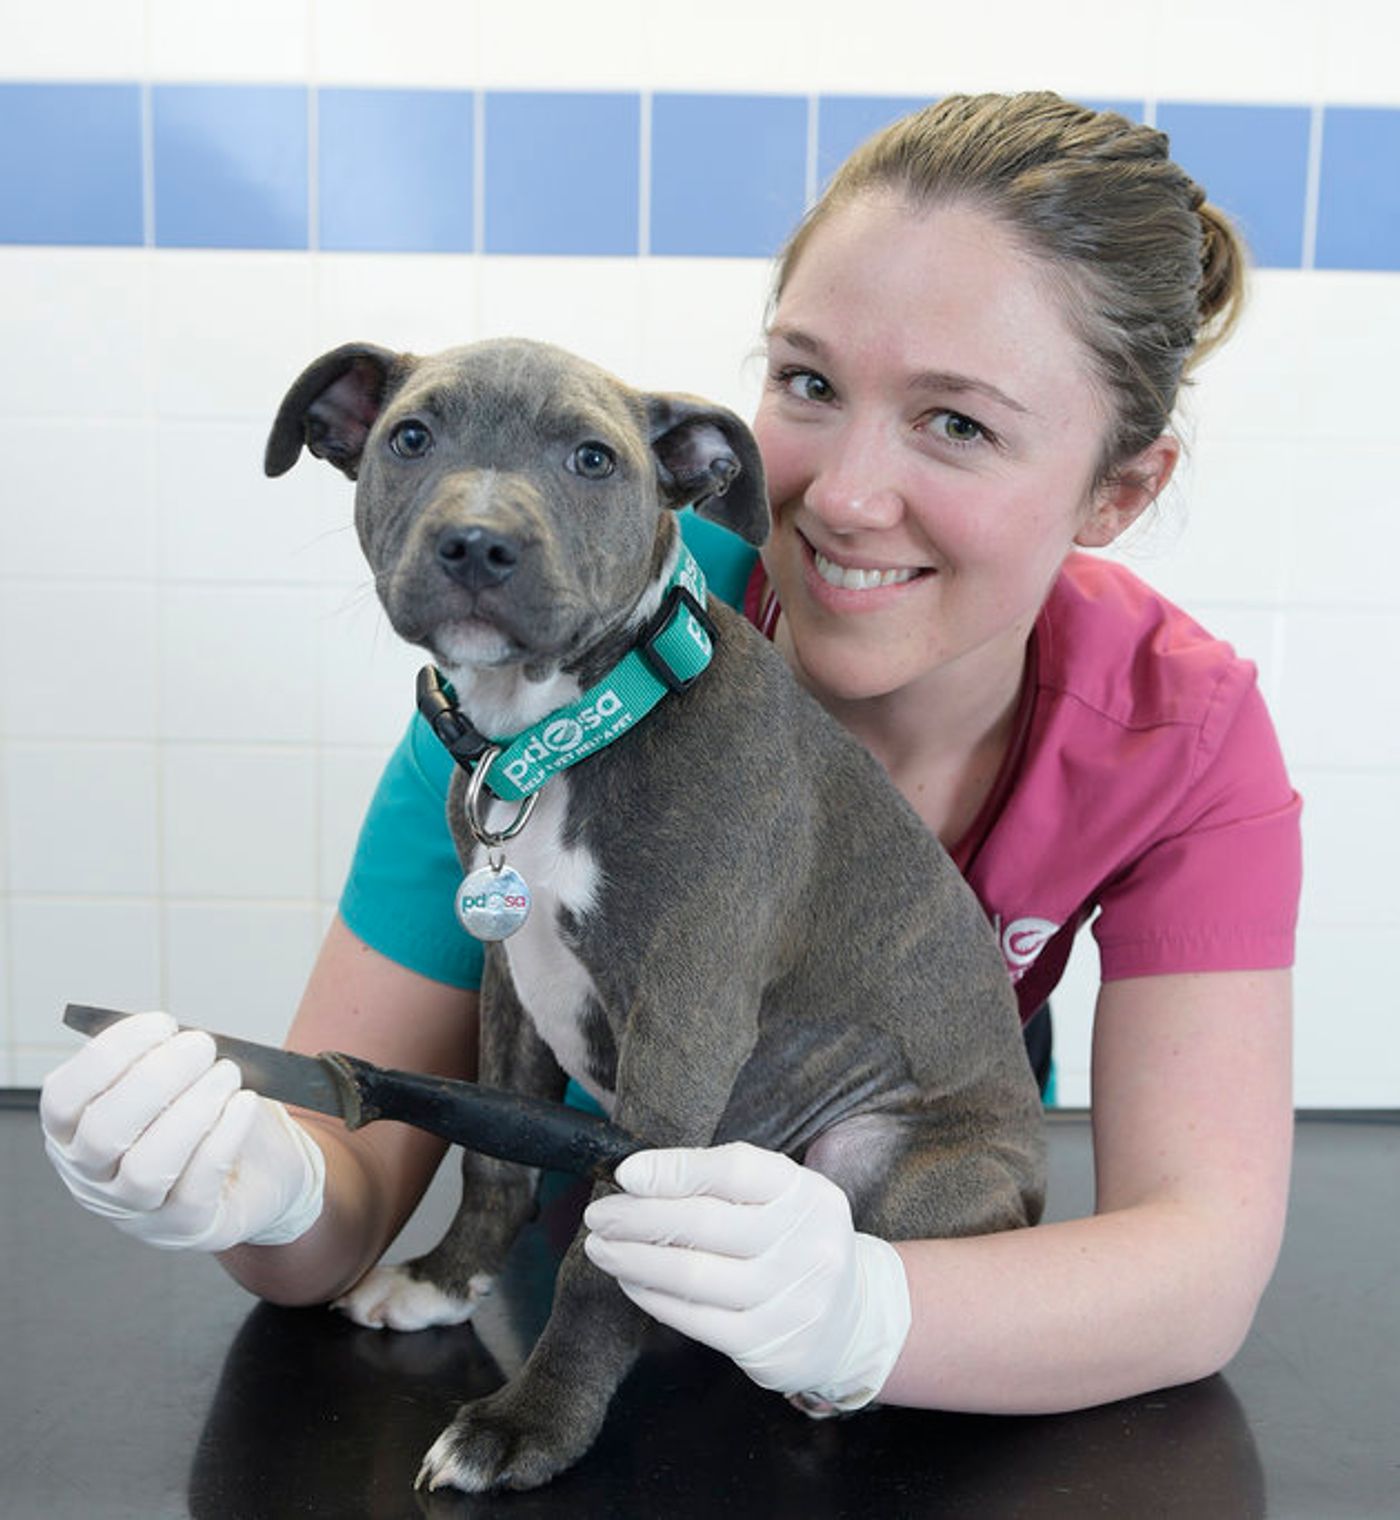 The vet poses with the dog post-surgury, showing the knife that was removed.